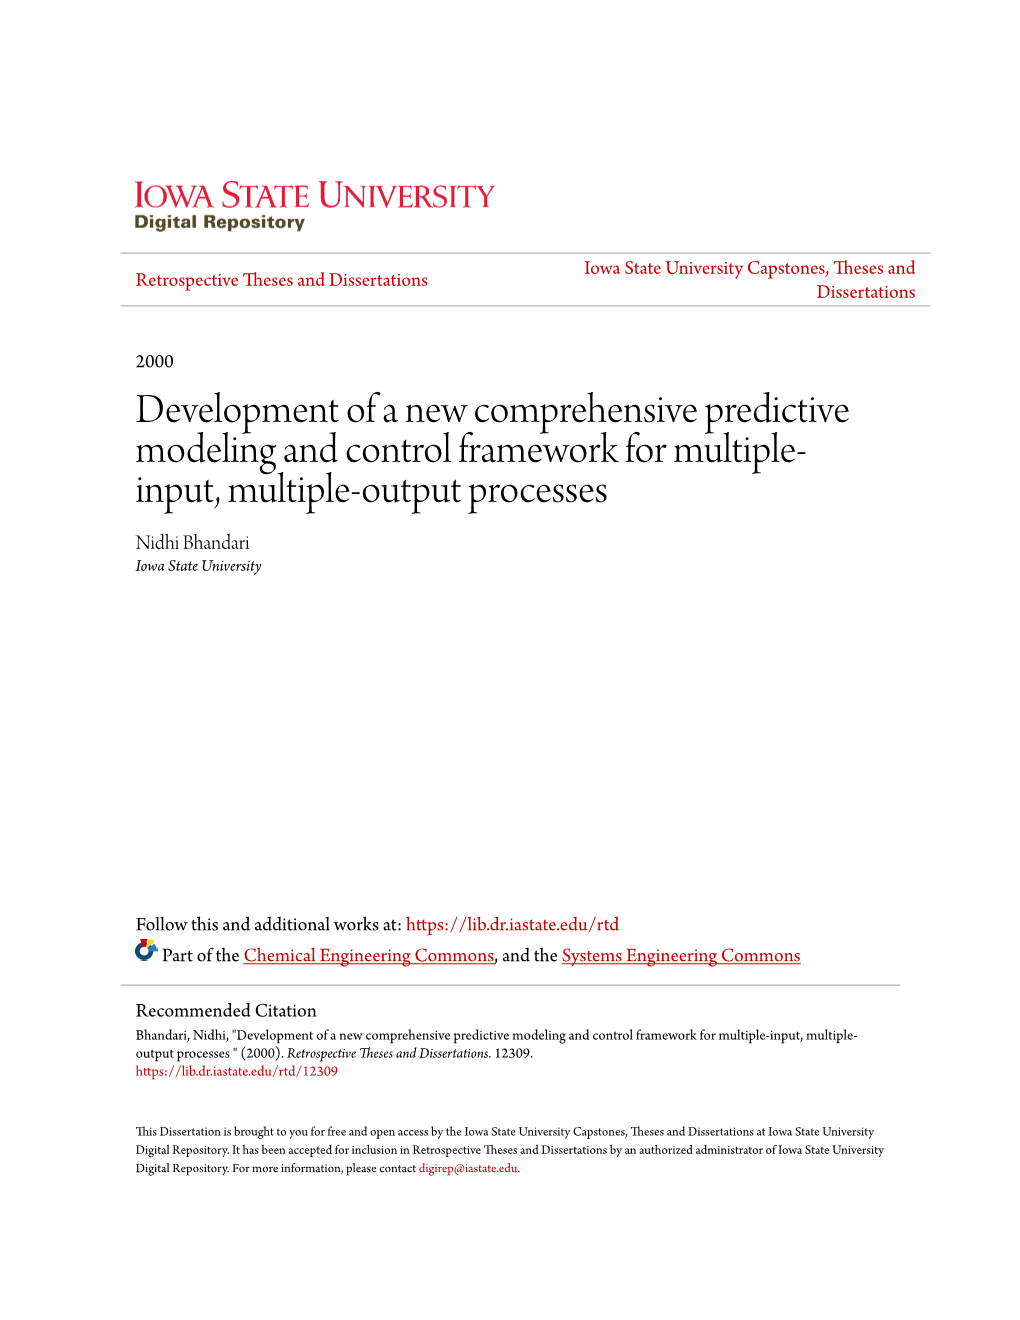 Development of a New Comprehensive Predictive Modeling and Control Framework for Multiple-Input, Multiple-Output Processes